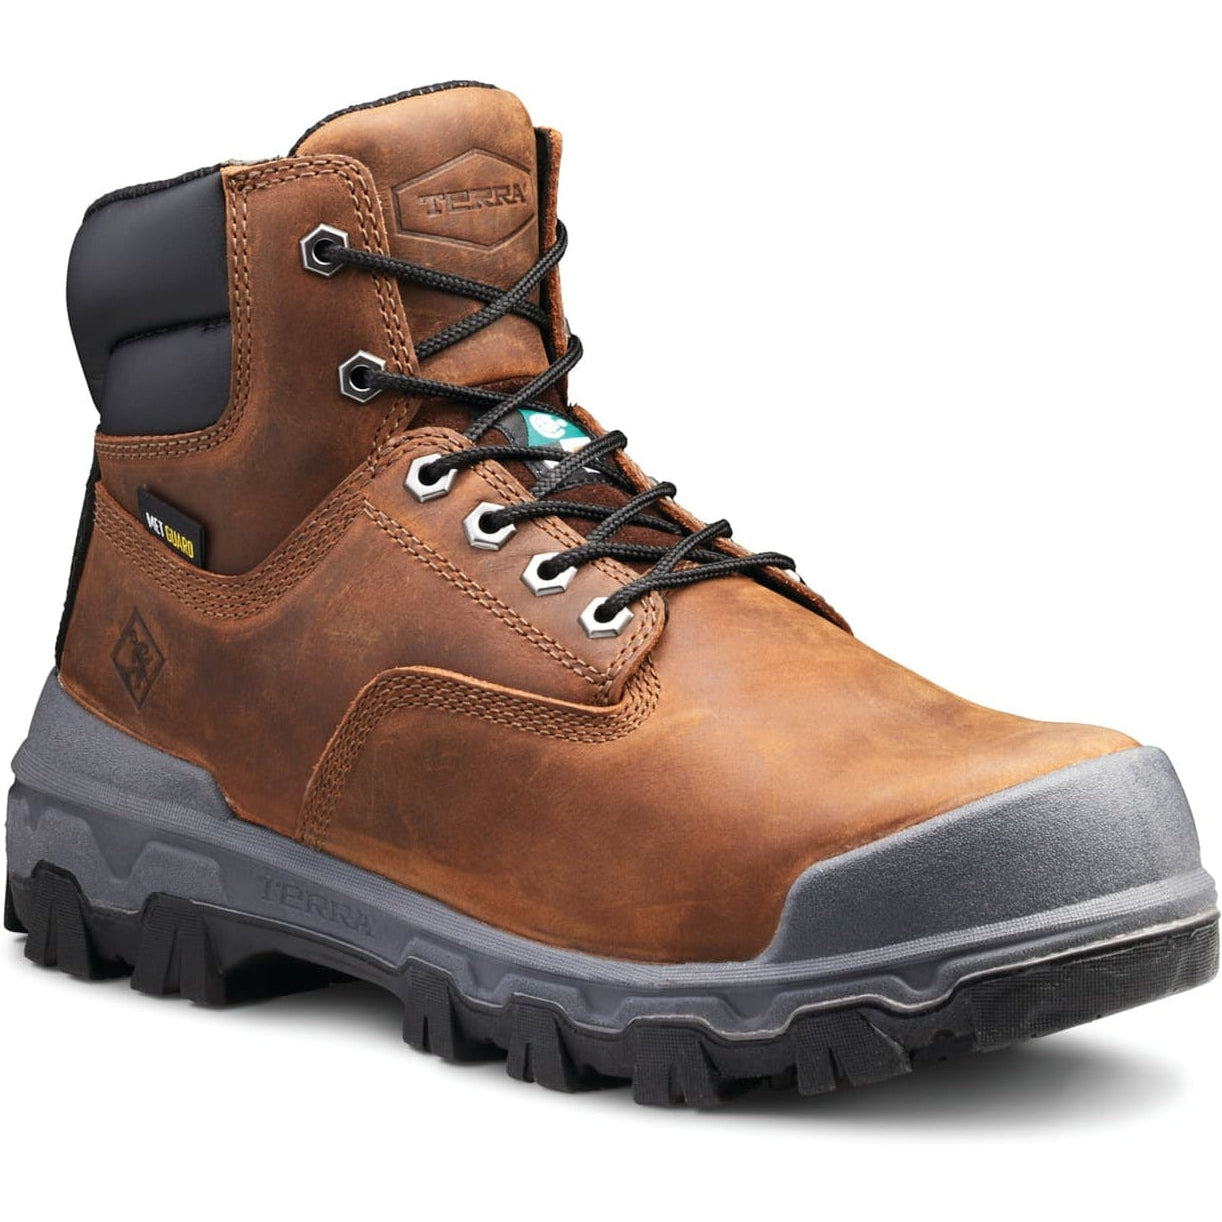 Terra Men's Sentry 2020 6" Comp Toe WP Safety Work Boot -Brown- R4NWBN 7 / Medium / Brown - Overlook Boots